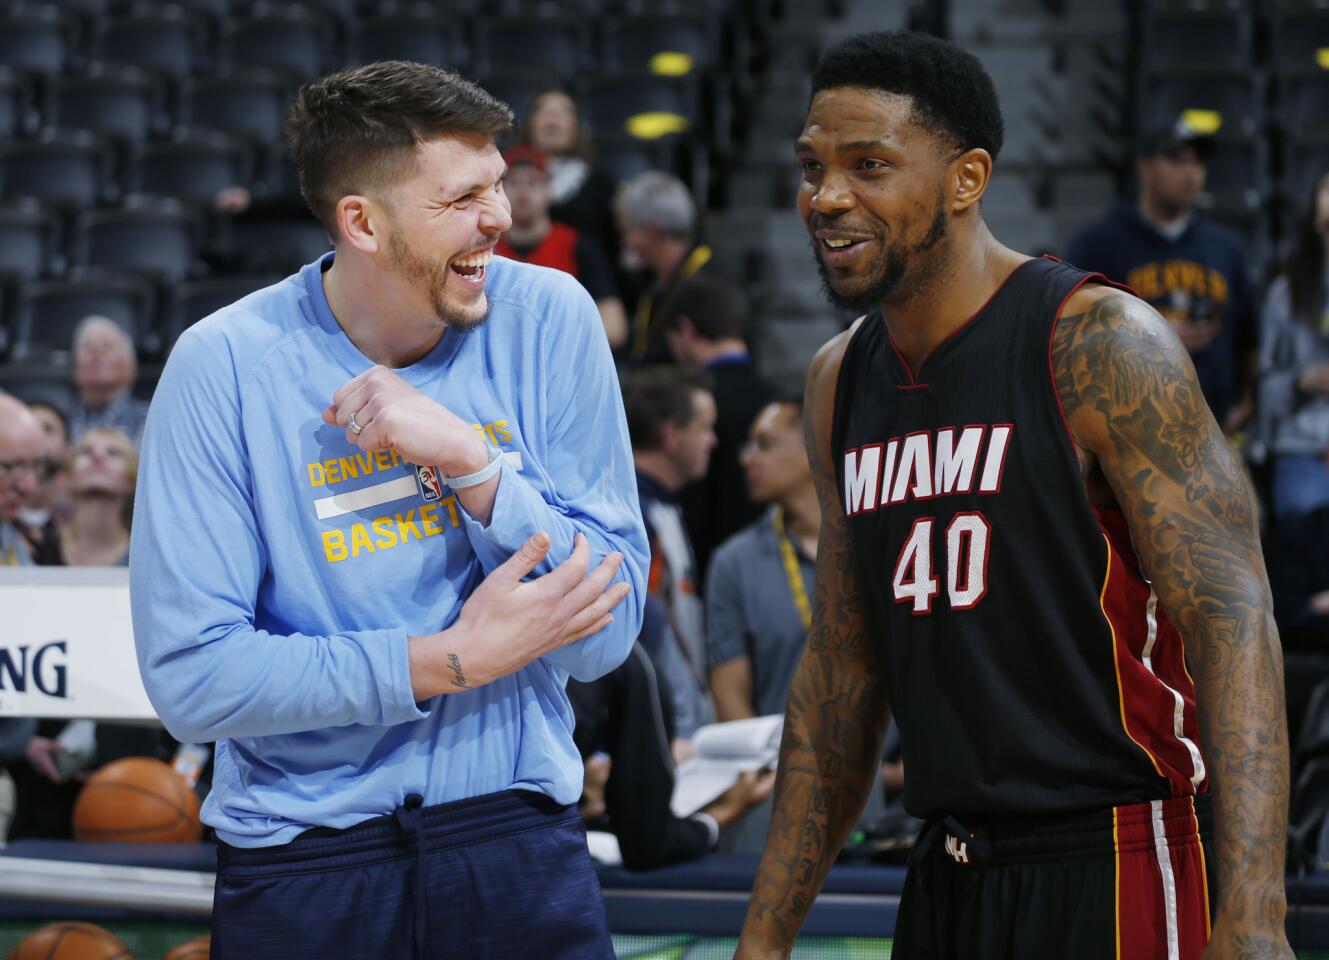 Denver Nuggets guard Mike Miller, left, jokes with former teammate Miami Heat forward Udonis Haslem during warmups before the first half of an NBA basketball game Friday, Jan. 15, 2016, in Denver. (AP Photo/David Zalubowski) ORG XMIT: CODZ101